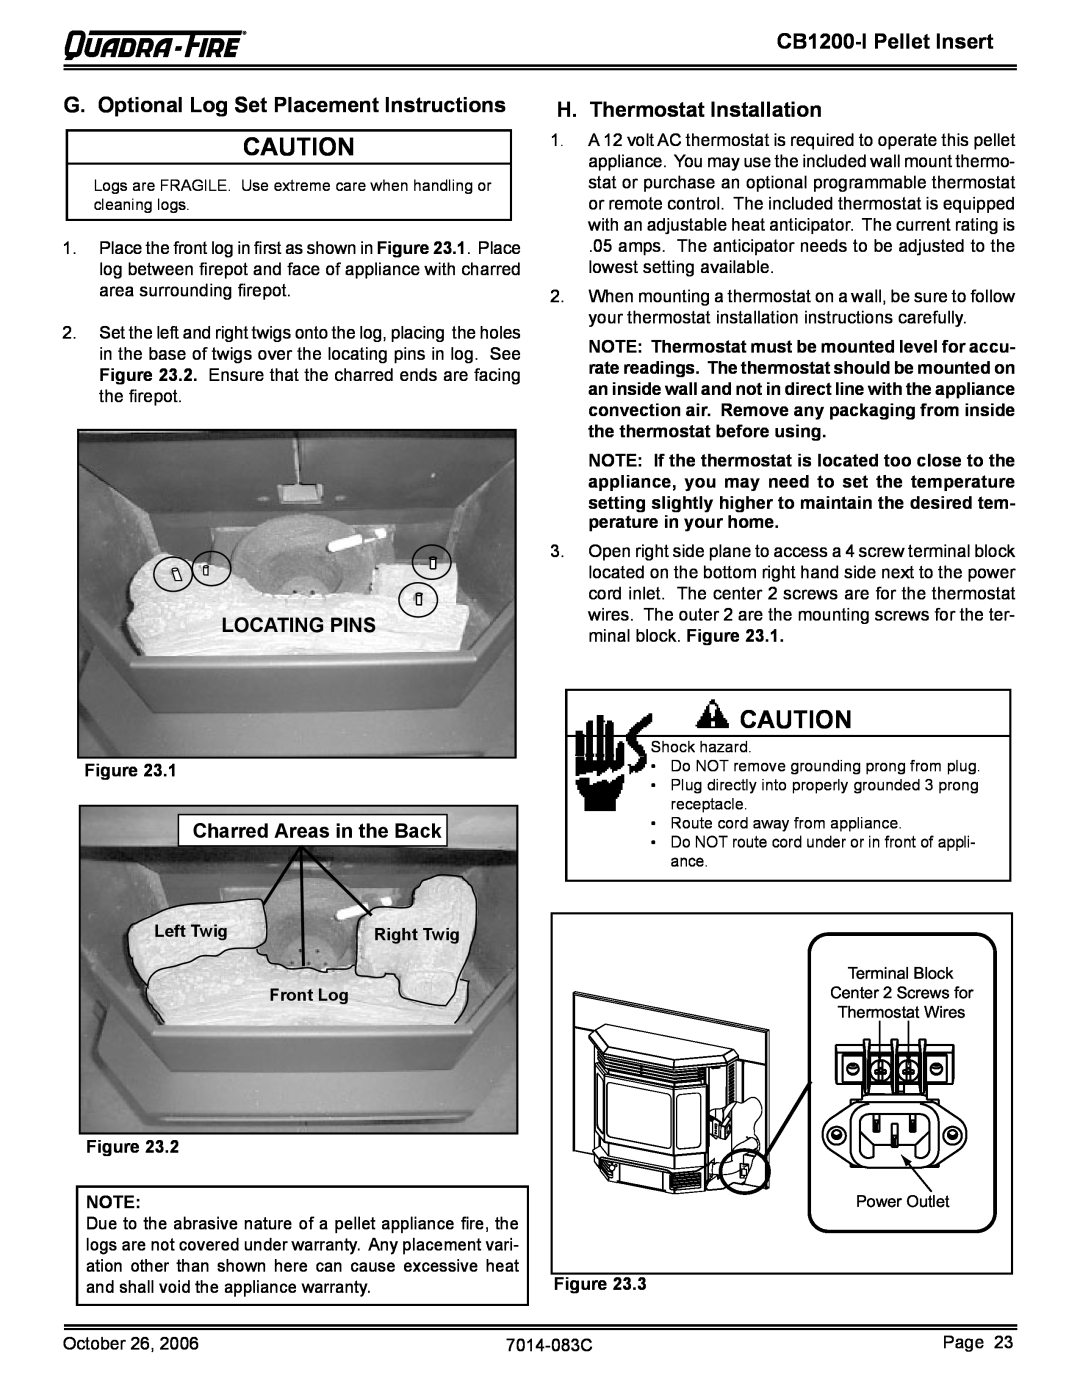 Quadra-Fire CB1200I-B owner manual G. Optional Log Set Placement Instructions, H. Thermostat Installation, Locating Pins 